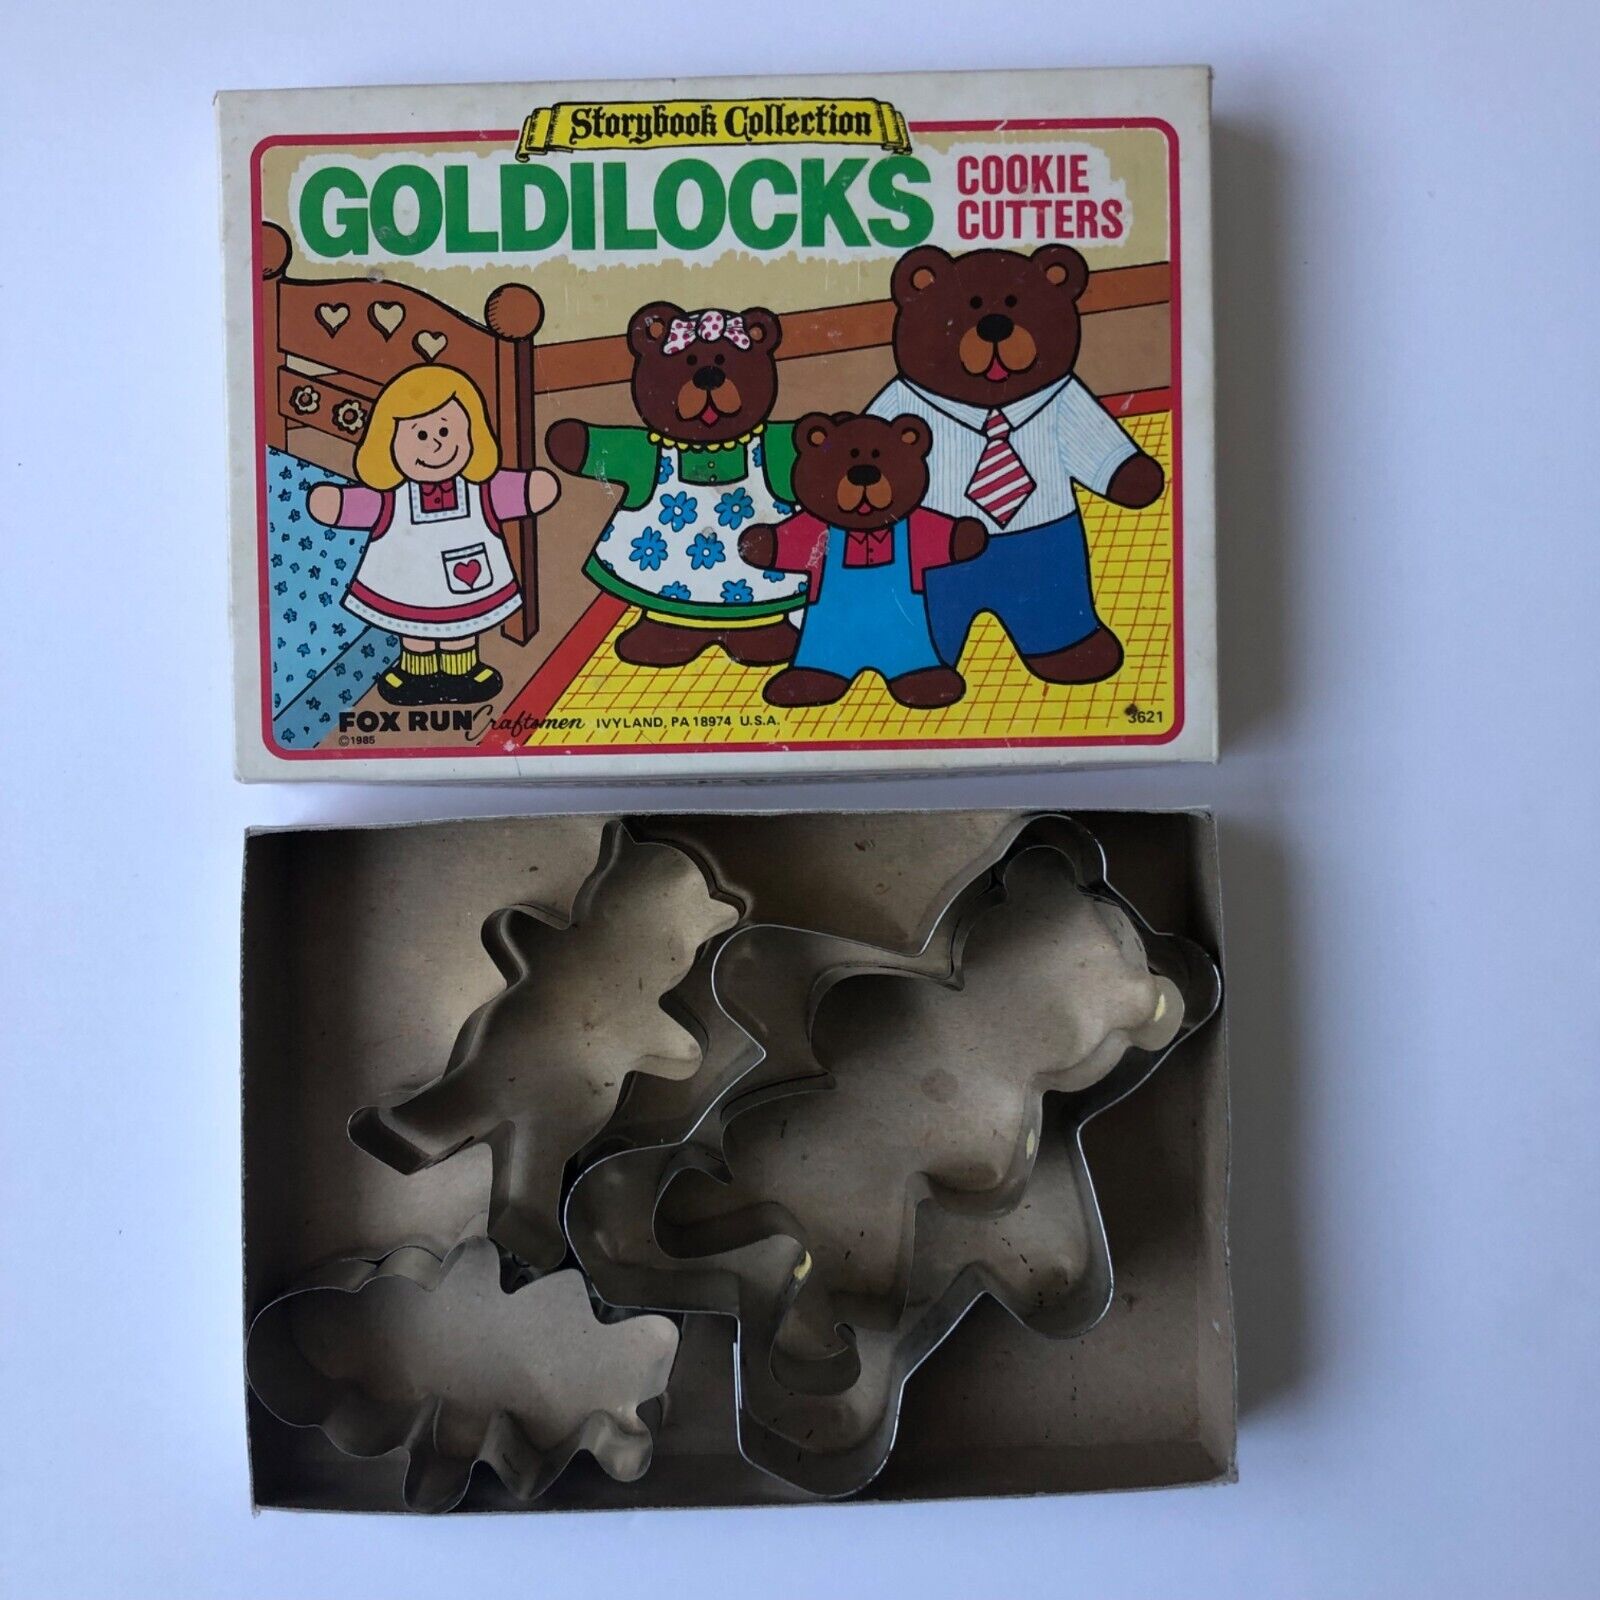 Vintage Goldilocks Teddy Bears 4 Cookie Cutters Box Storybook Collection 1985